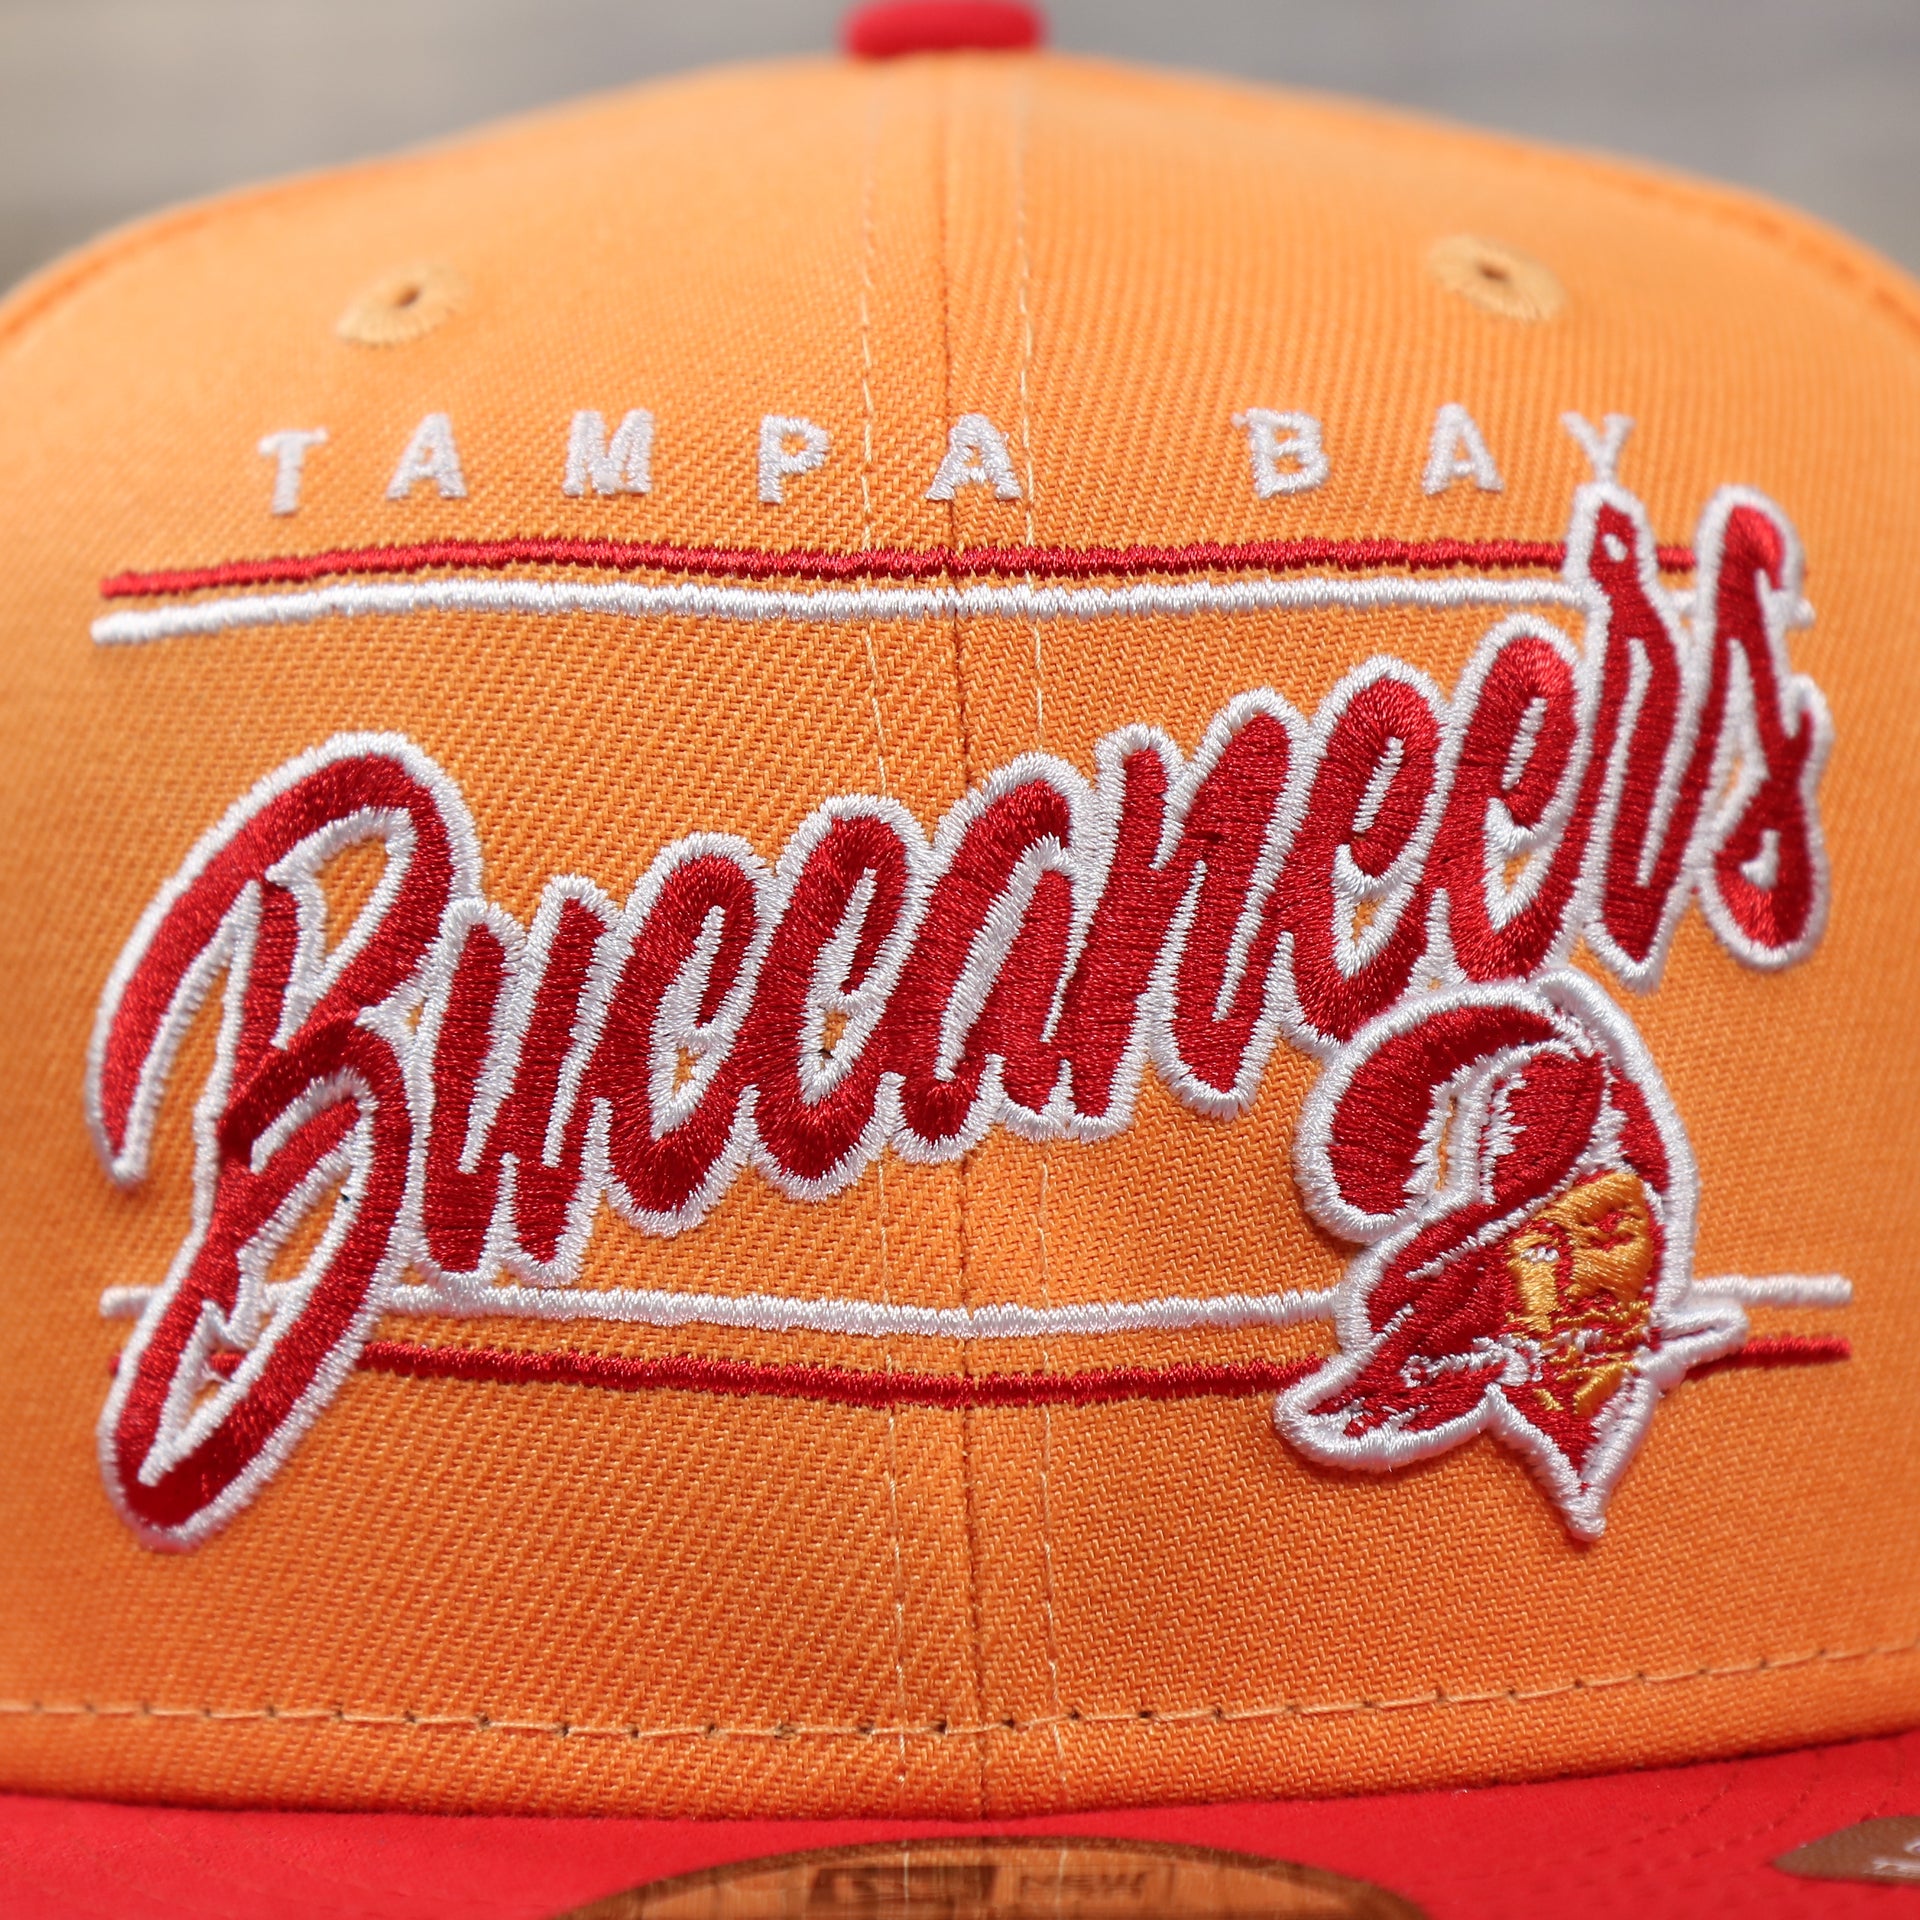 The Tampa Bay Buccaneers Team Script on the Tampa Bay Buccaneers Team Script Gray Bottom 9Fifty Snapback | Orange And Red Snap Cap